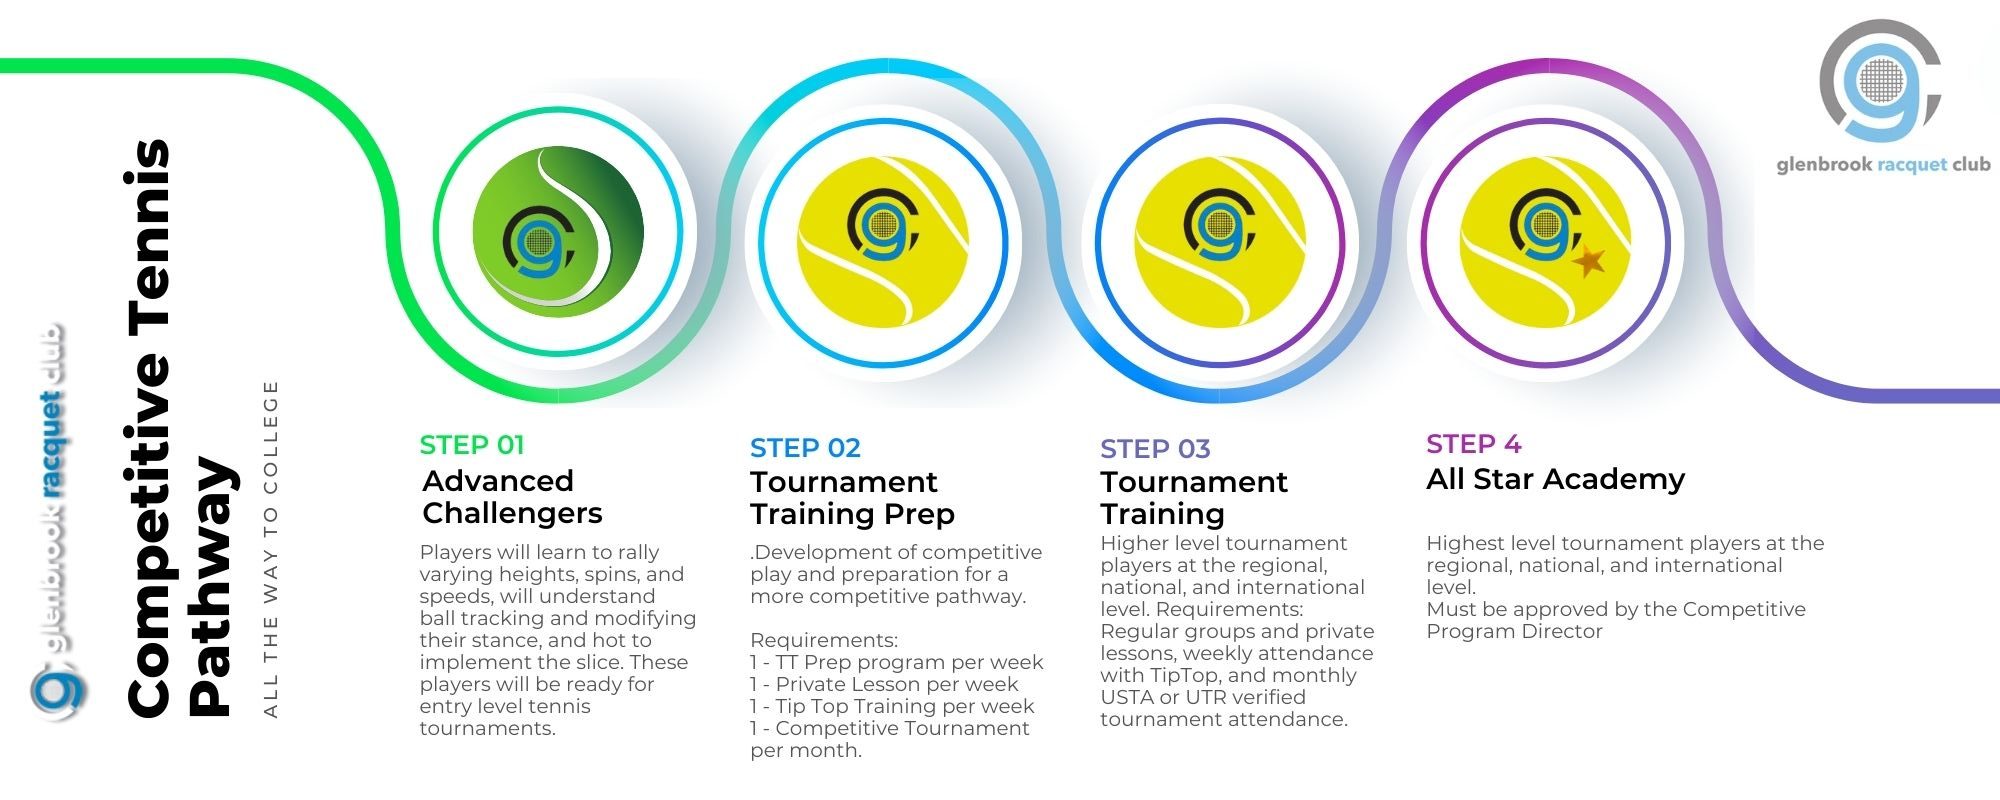 Competitive Tennis Pathway for Tournament and College players